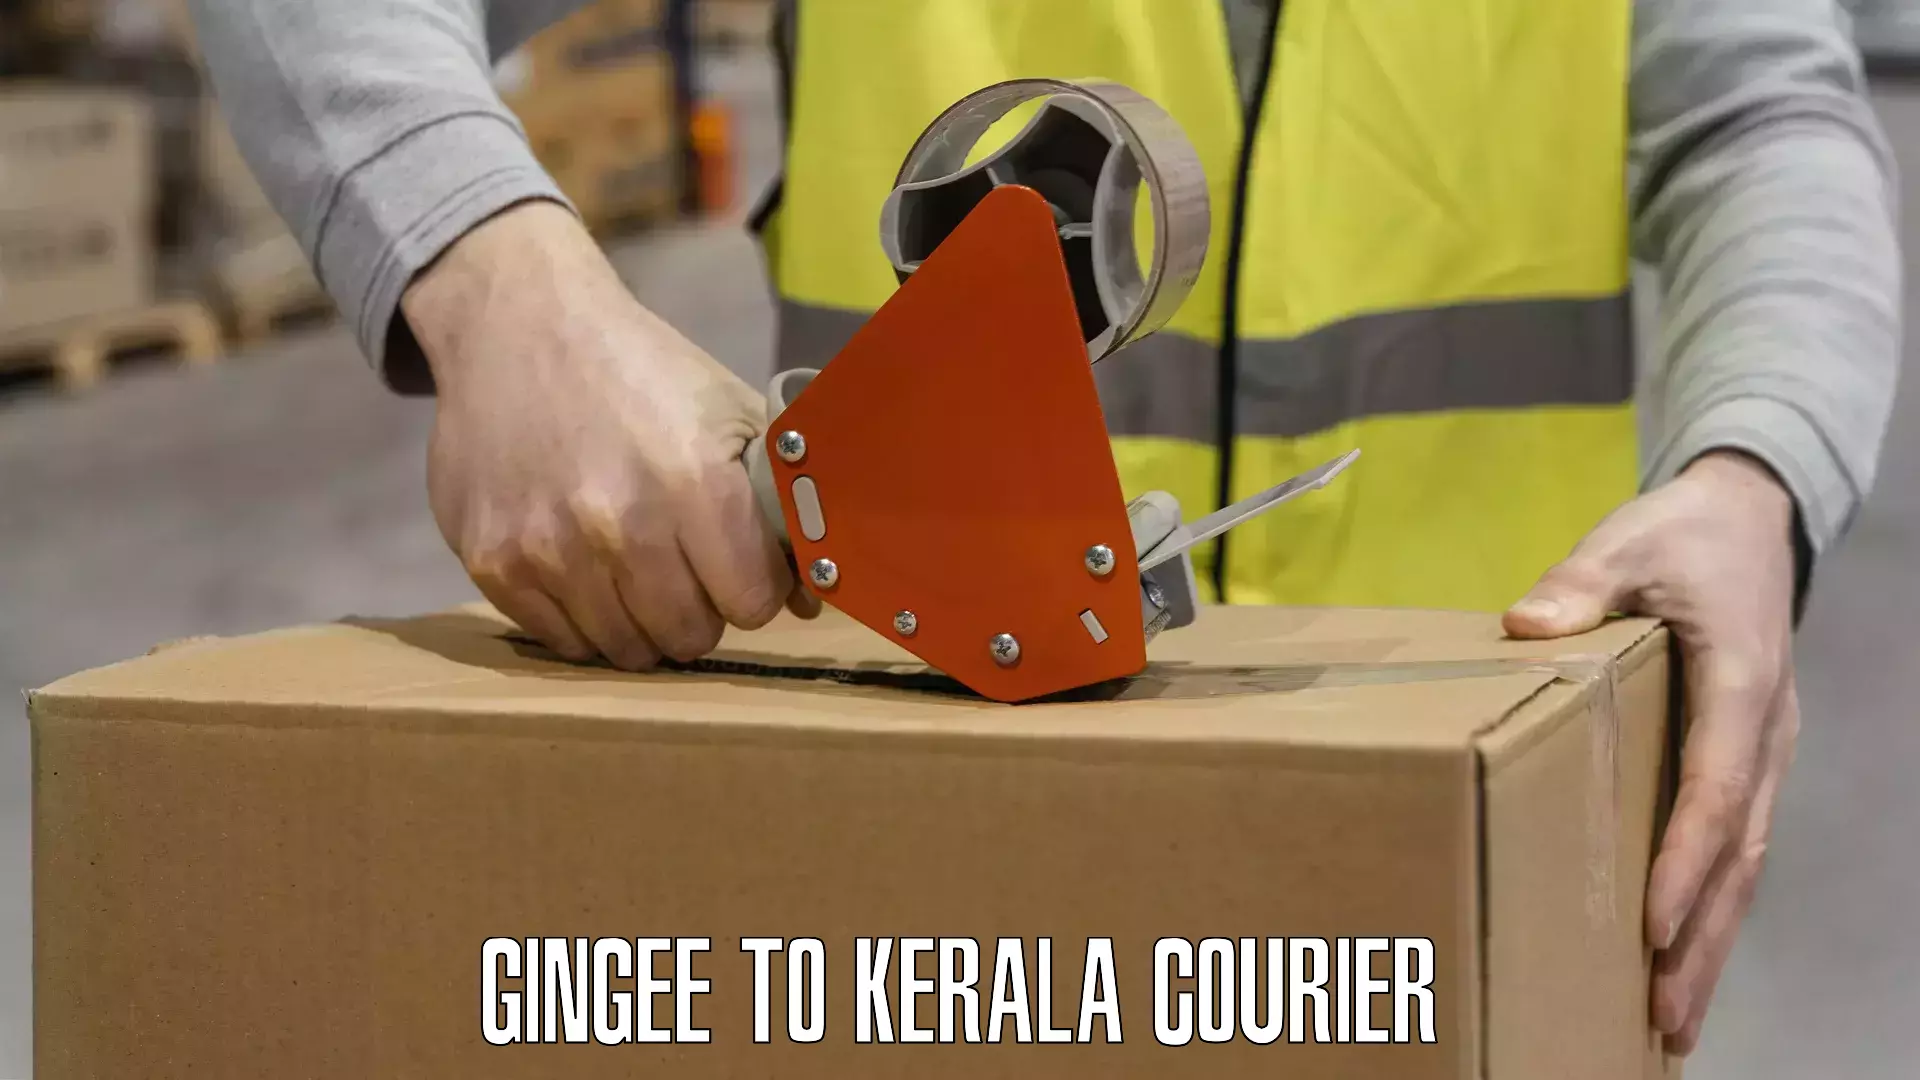 On-call courier service Gingee to Cochin Port Kochi